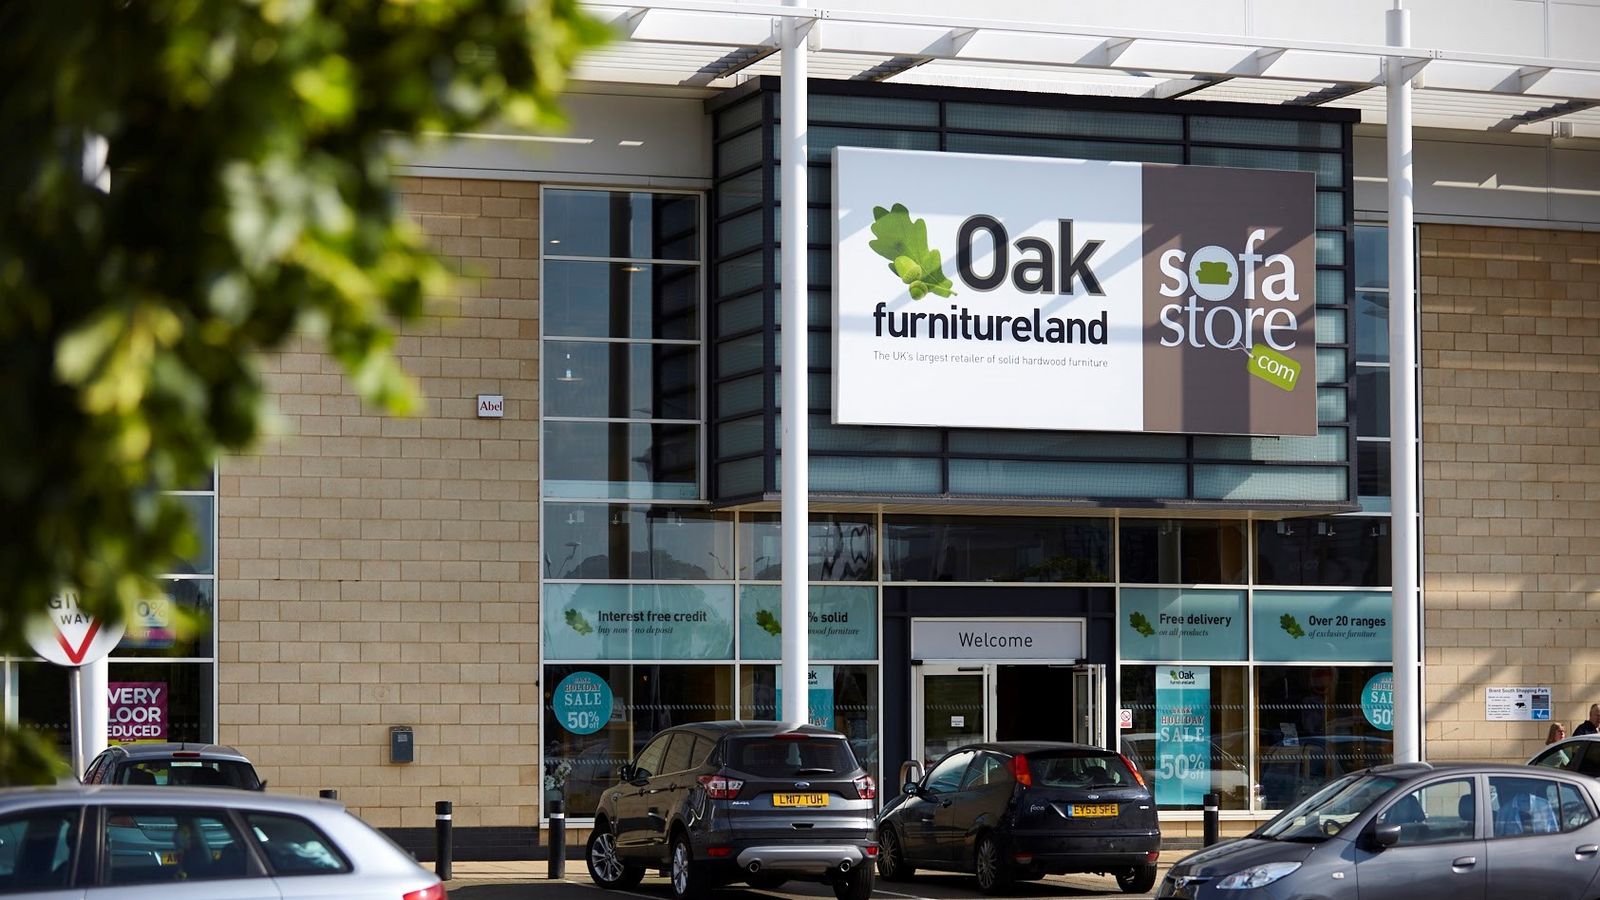 Oak Furnitureland branches out as founder eyes stake sale | Business